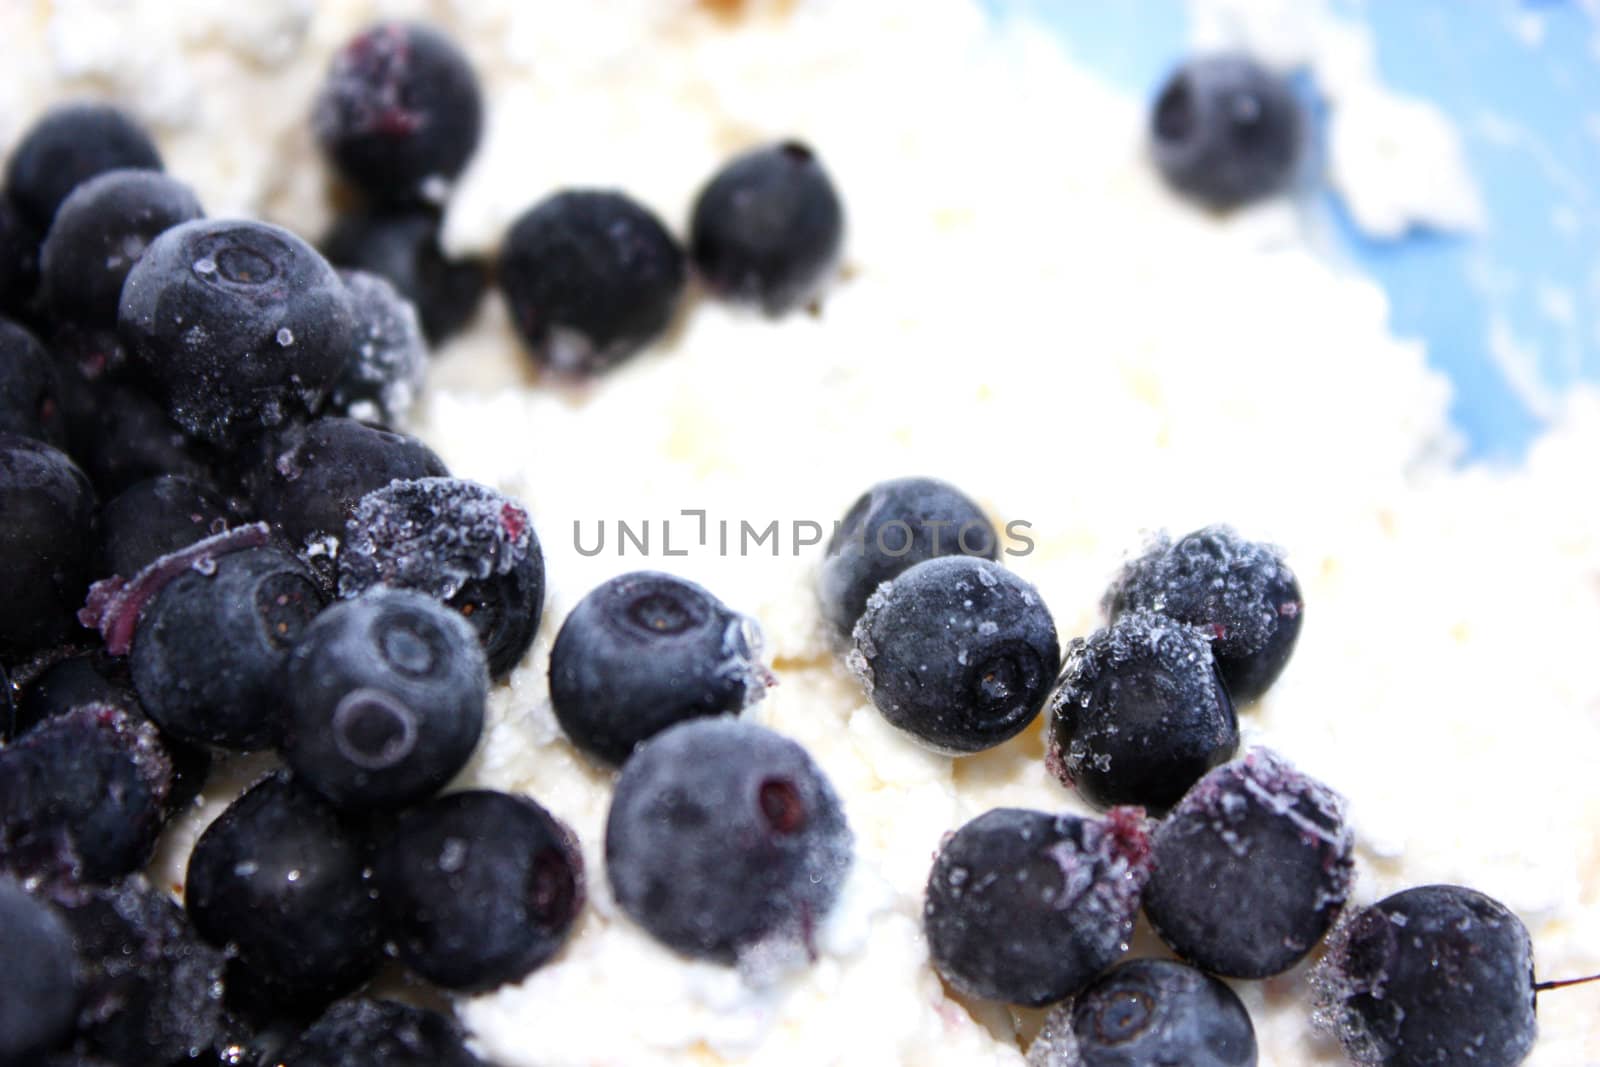 ripe blueberries with cream cheese, frozen blueberries, fresh blueberries, healthy food